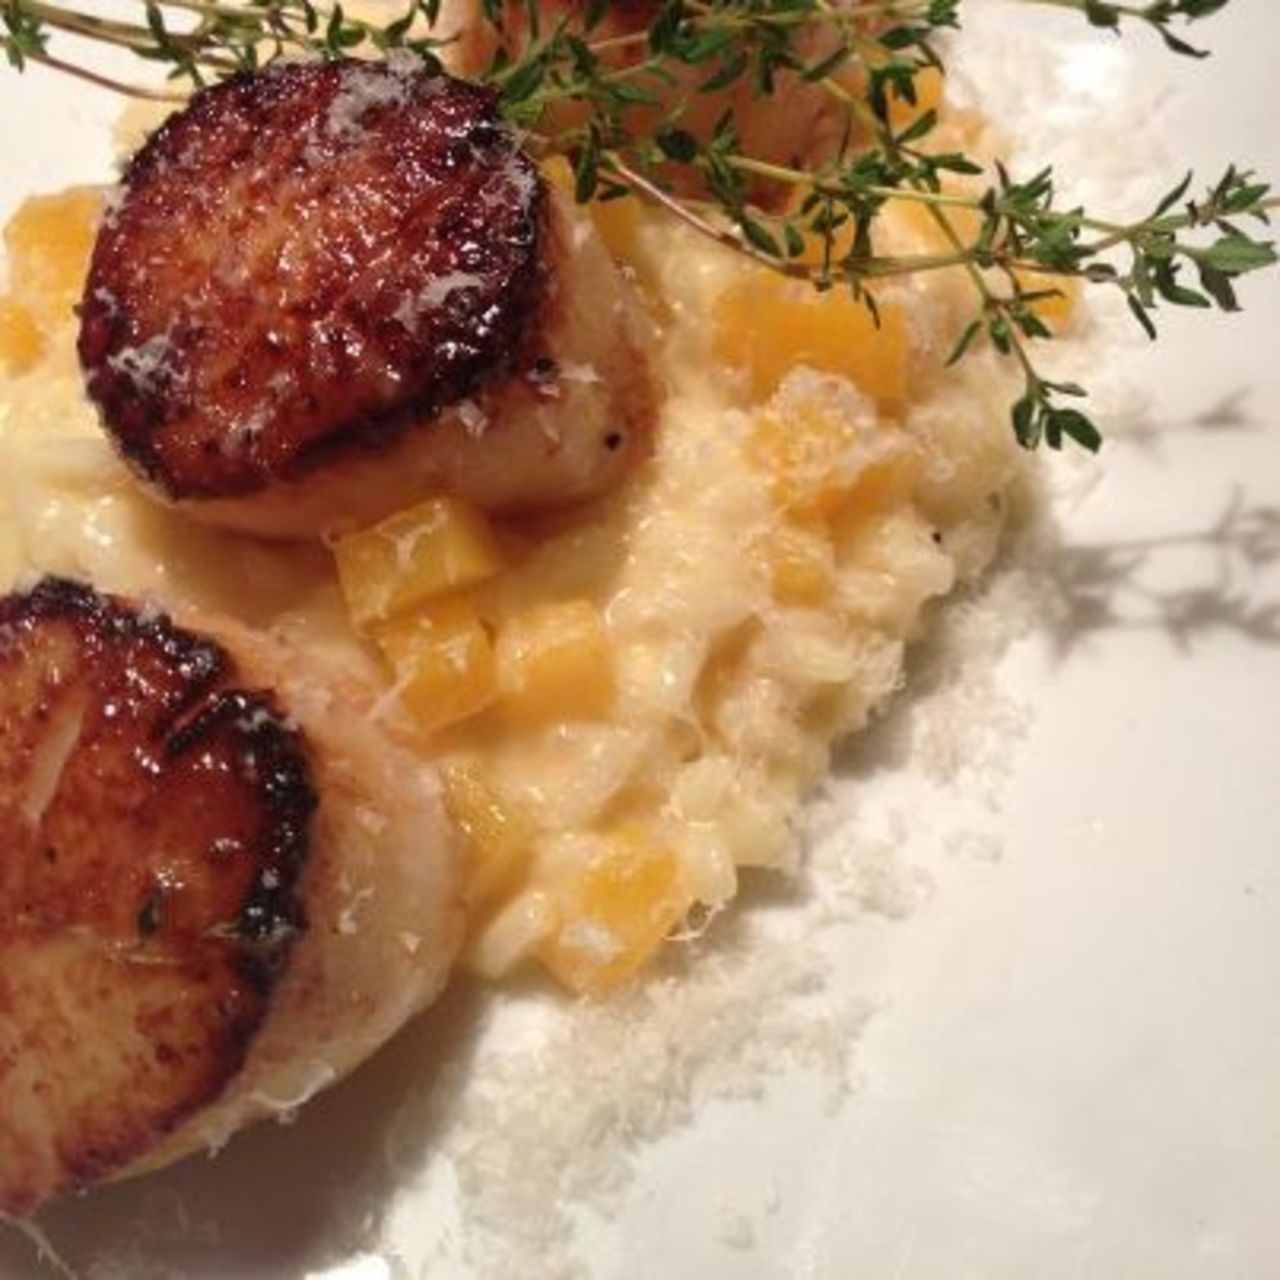 "As part of a revitalization project in this blue-collar town, two high-school friends opened <a href="http://cornerstonepk.com/" target="_blank" target="_blank">Cornerstone Pub & Kitchen</a>. The diver scallops with butternut-squash risotto are the best I've had." -- <a href="http://ireport.cnn.com/docs/DOC-879219">Patty Carbee</a>